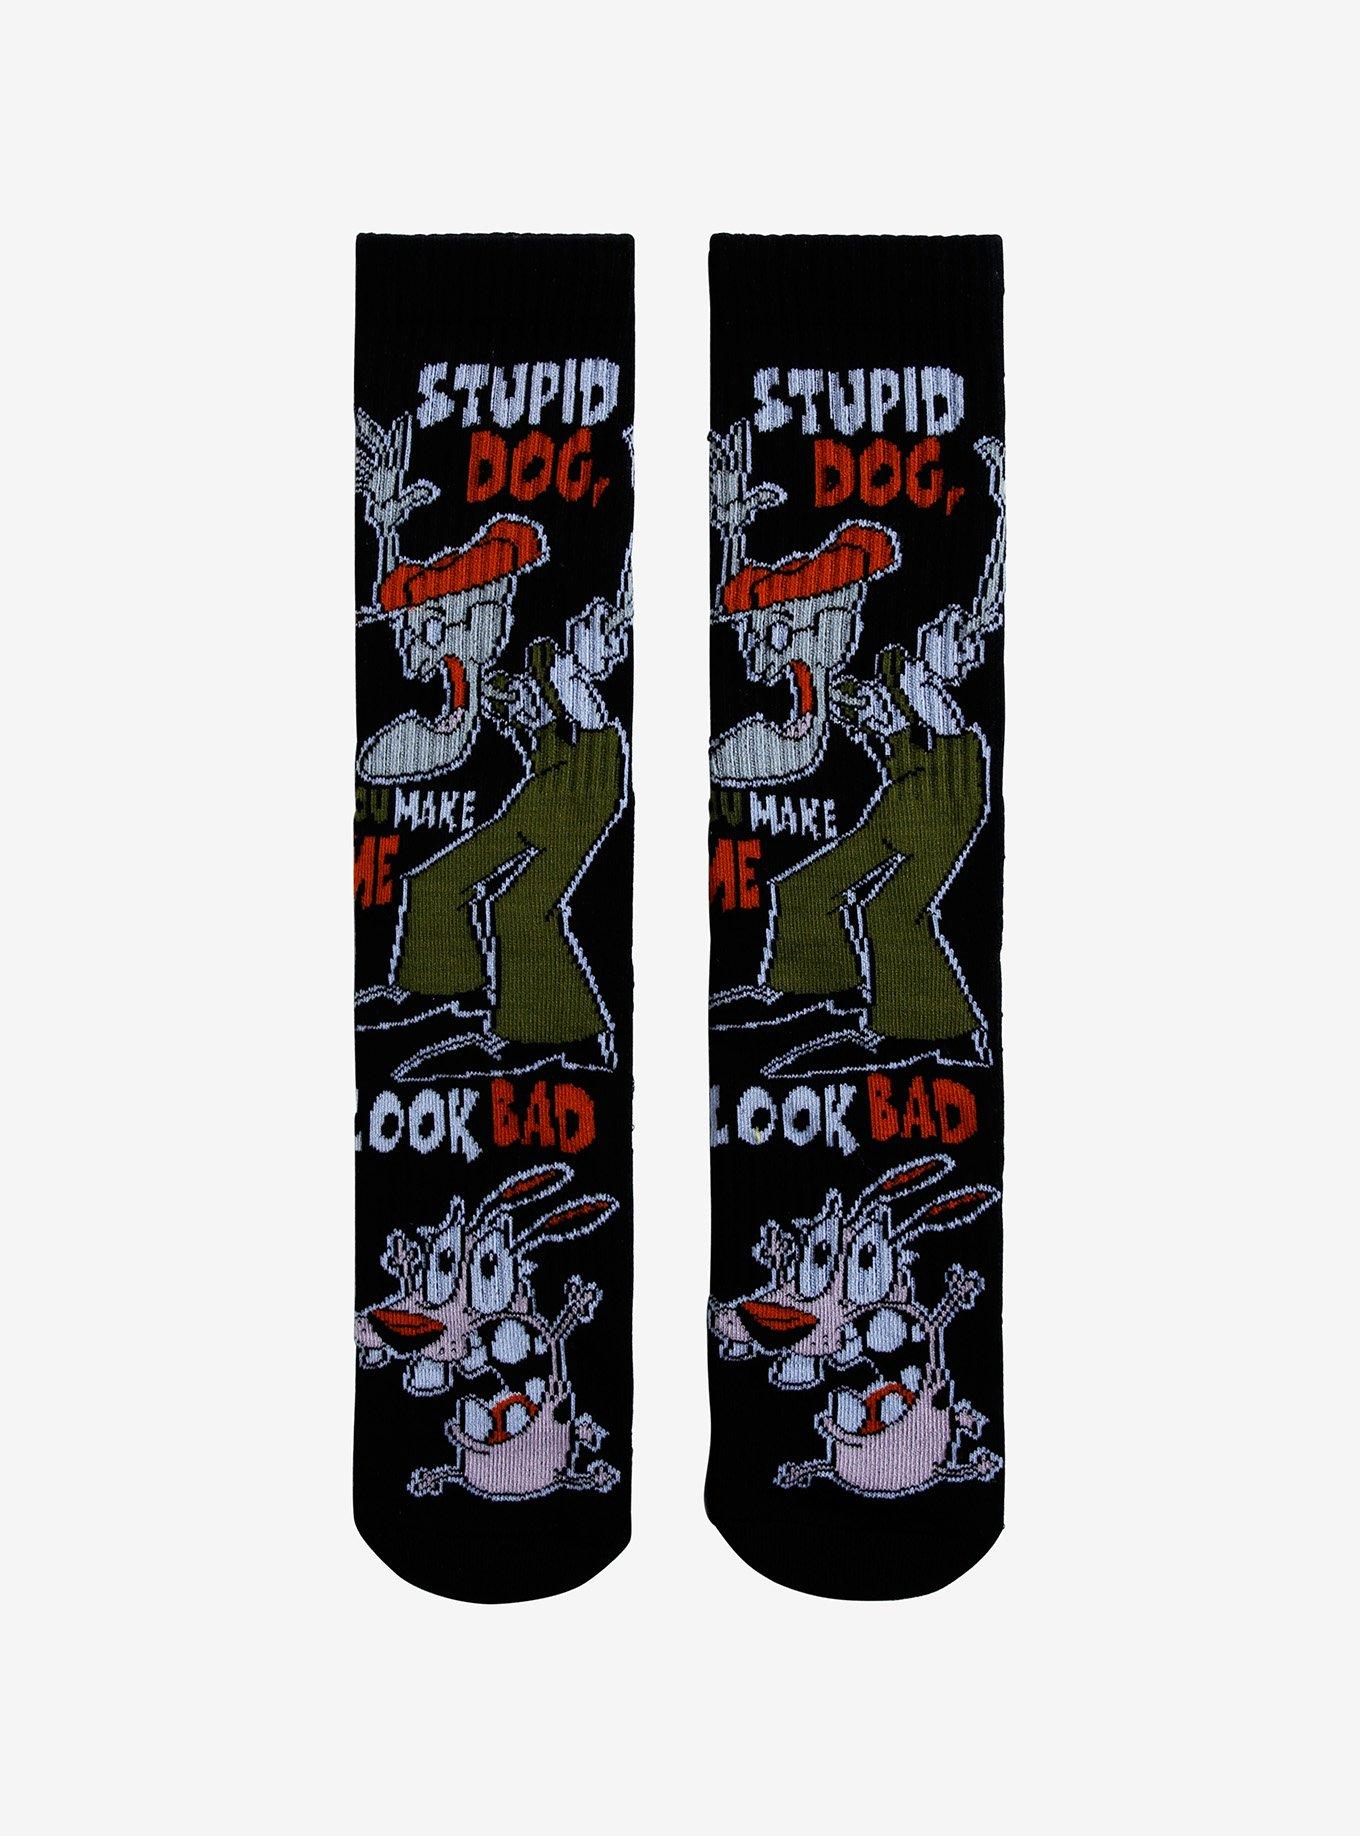 Courage The Cowardly Dog Eustace Bagge Crew Socks | Hot Topic